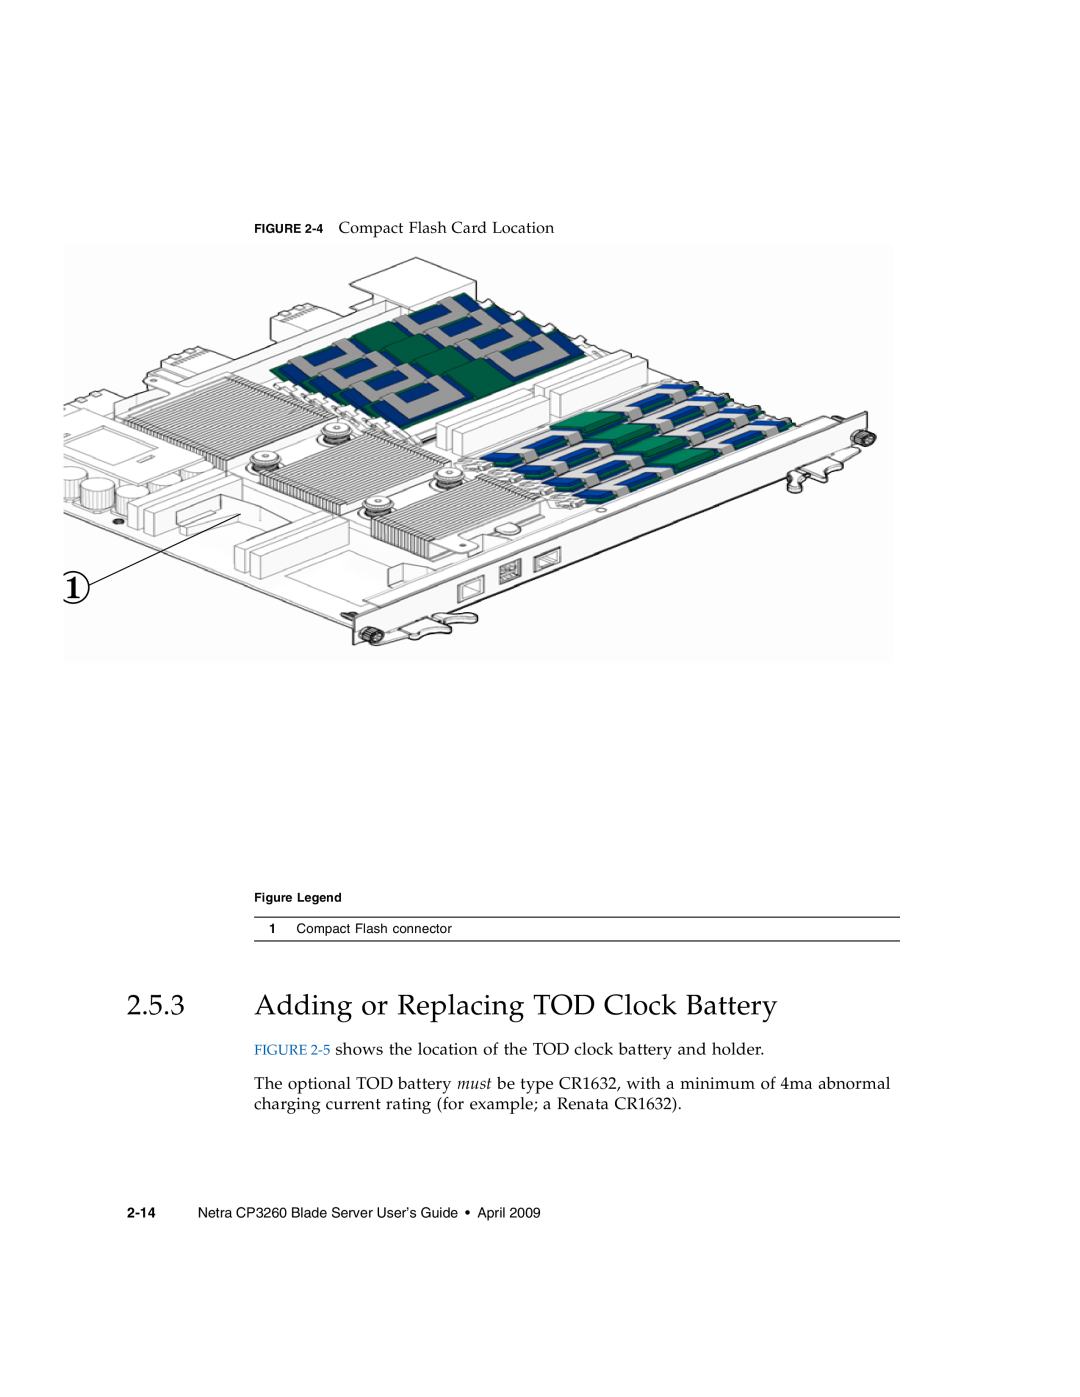 Sun Microsystems manual Adding or Replacing TOD Clock Battery, Netra CP3260 Blade Server User’s Guide April 